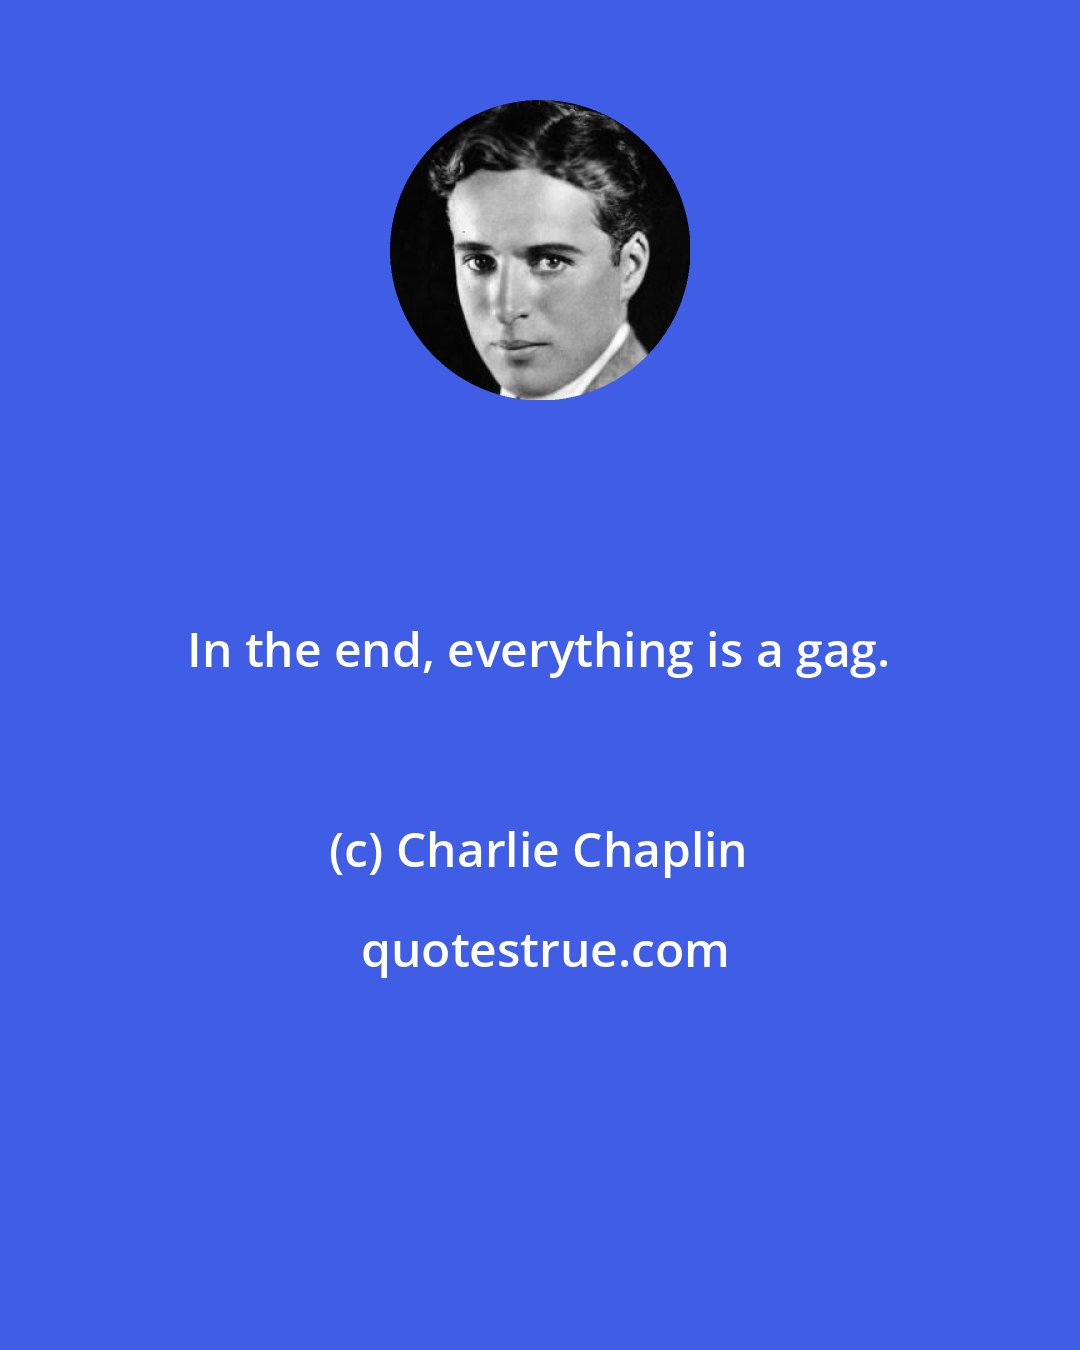 Charlie Chaplin: In the end, everything is a gag.